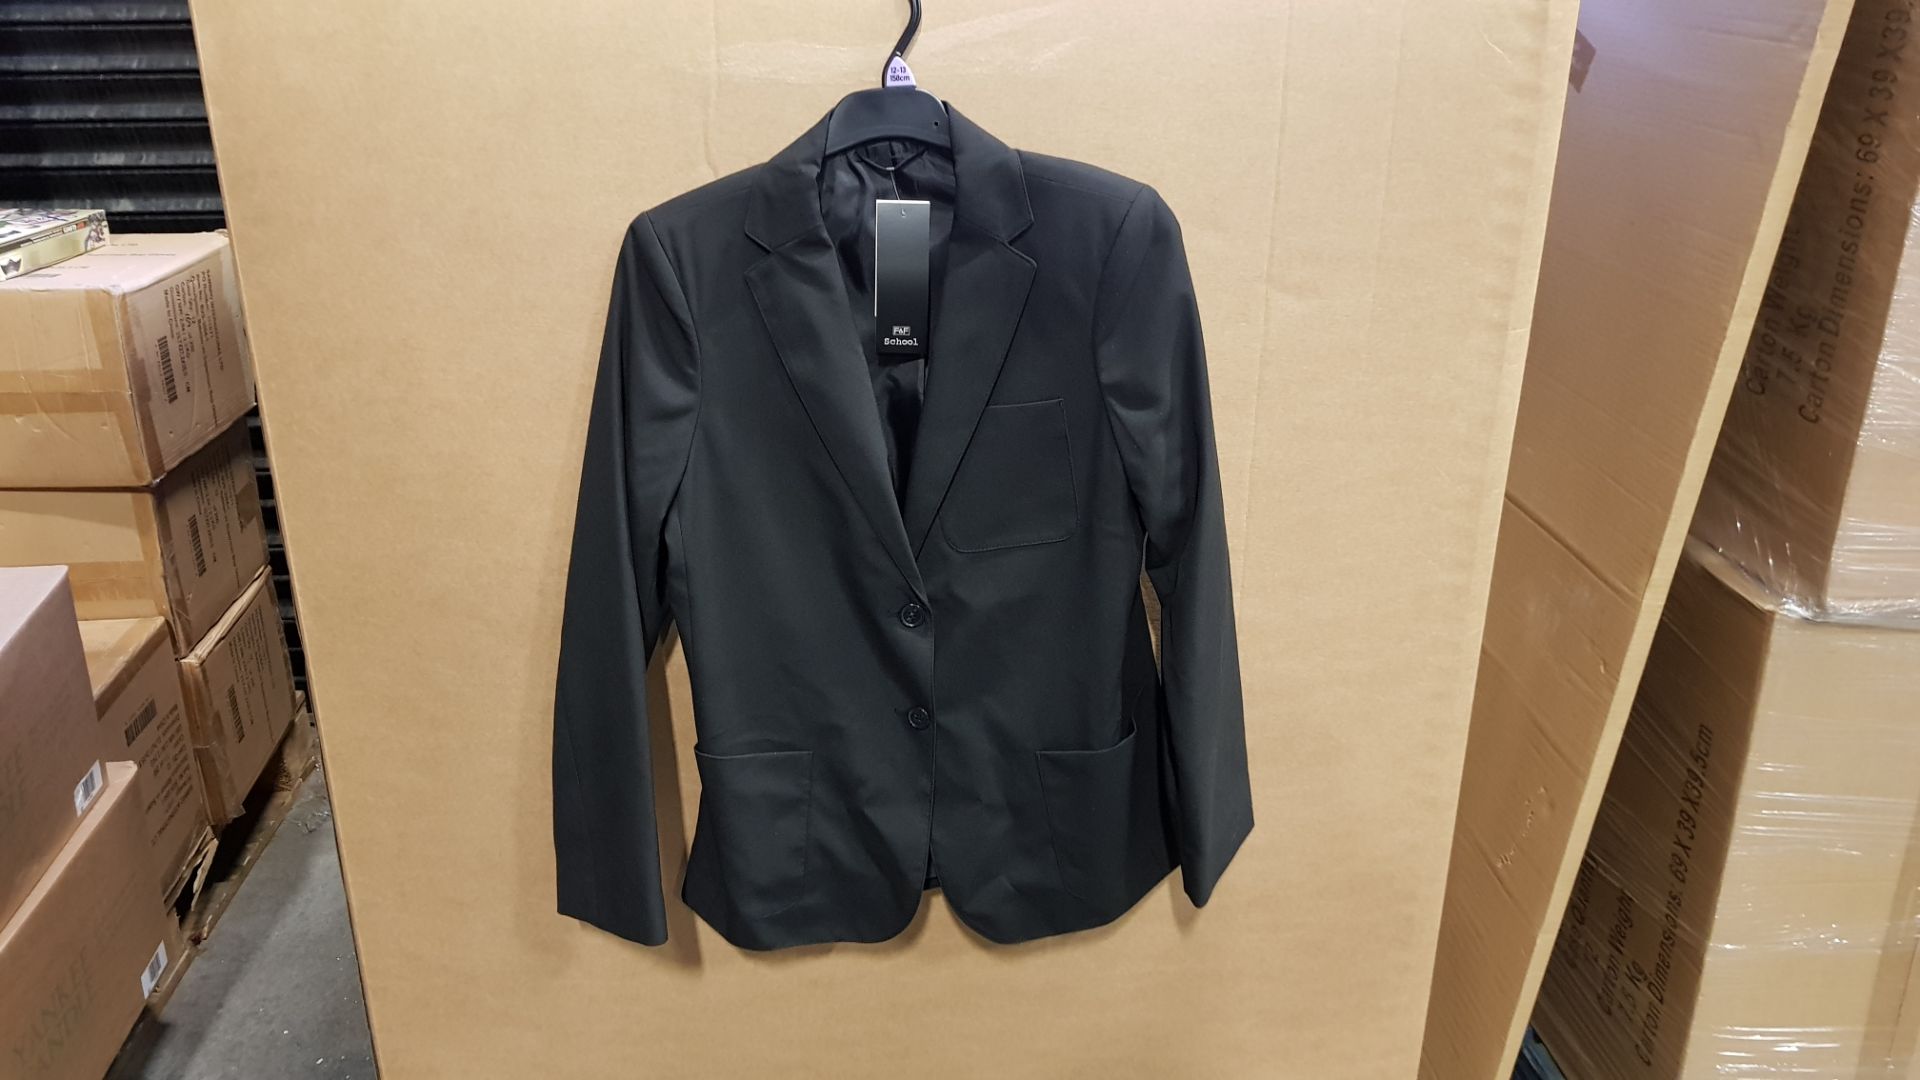 £500 MIN RETAIL PRICED BRAND NEW CHILDRENS BLACK BLAZERS IN VARIOUS AGES - NOTE SIMPLE MAGNETIC